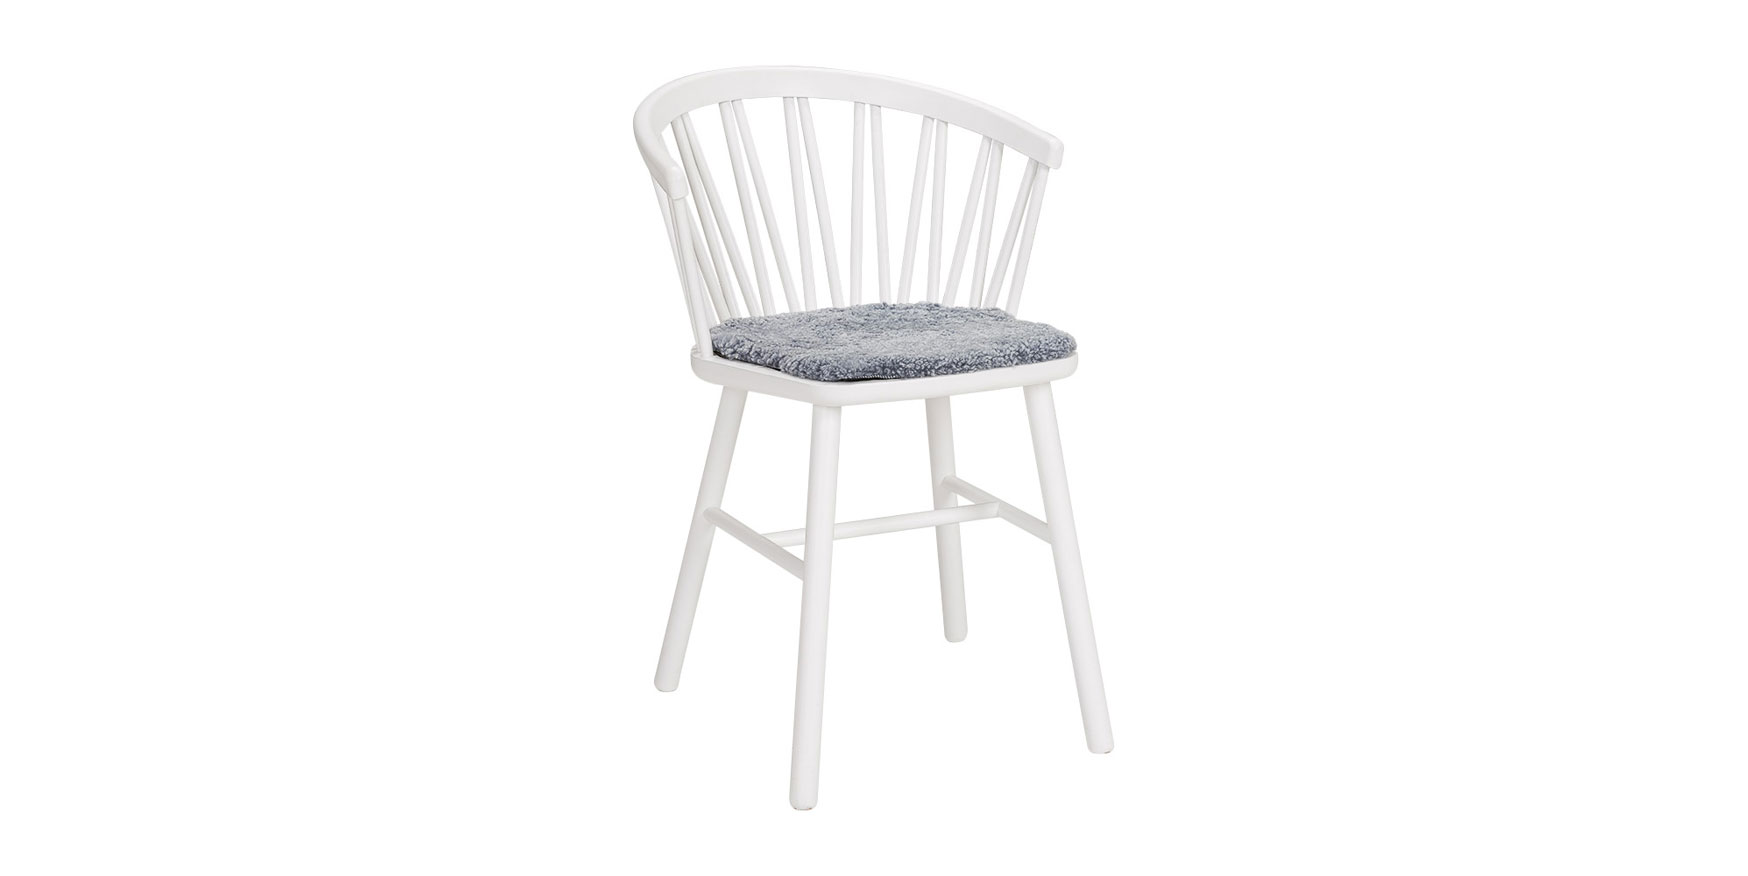 elegant dining chairs for sale
